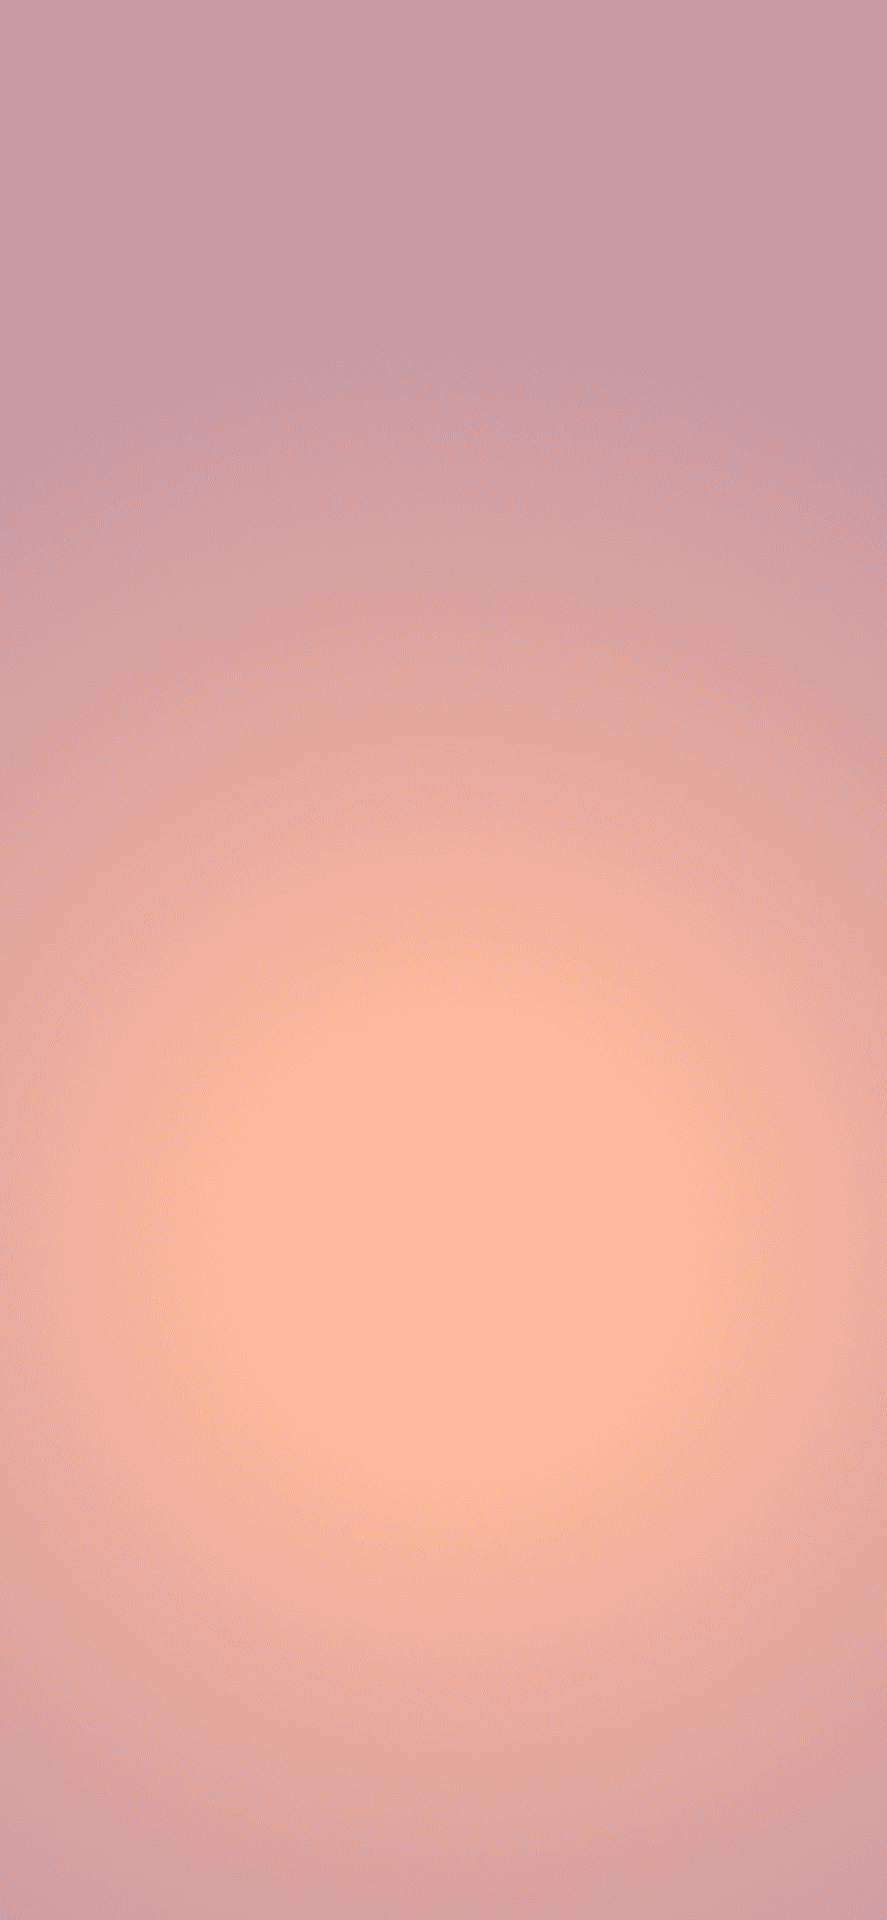 A Soft and Simple Basic Background